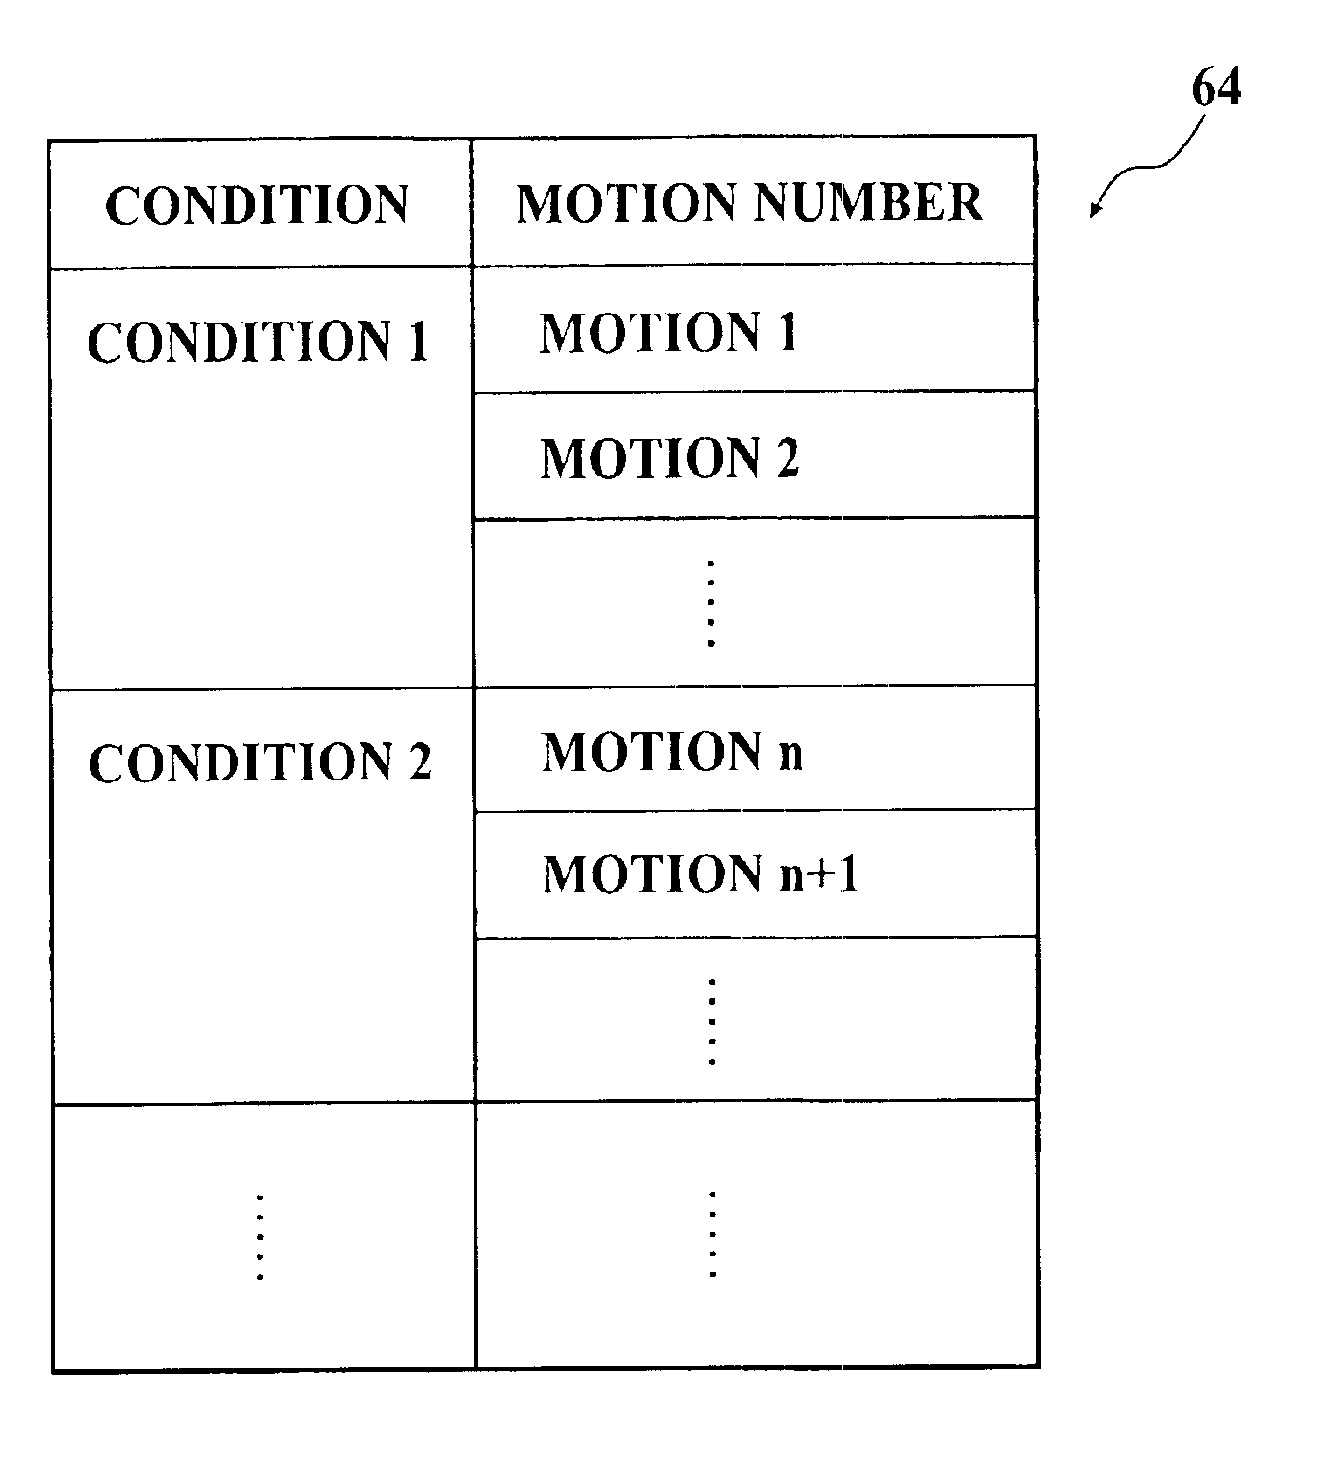 Method, storage medium, apparatus, server and program for providing an electronic chat